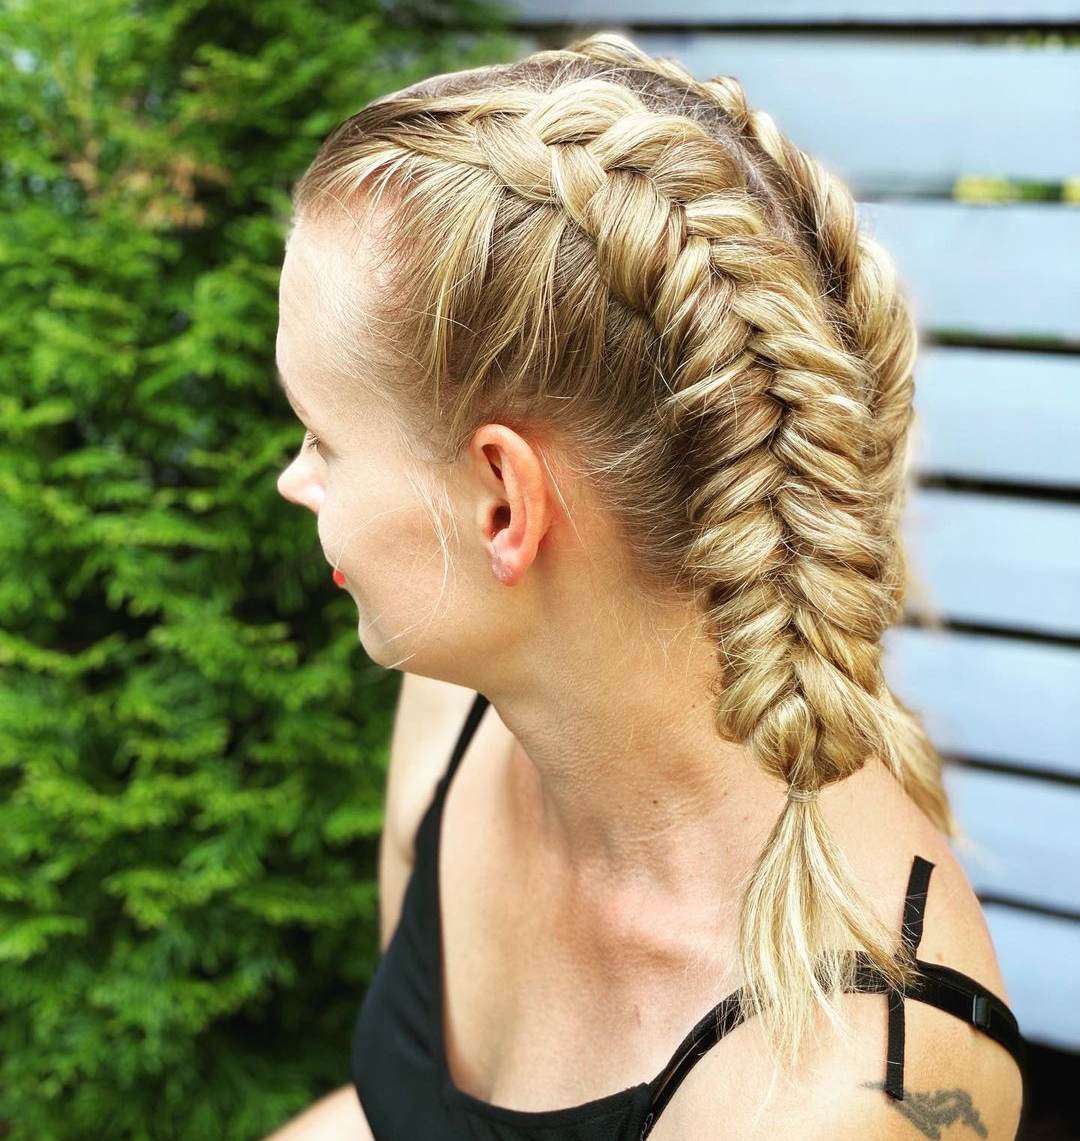 Fishtail Braids to prevent your hair from smelling like bonfire